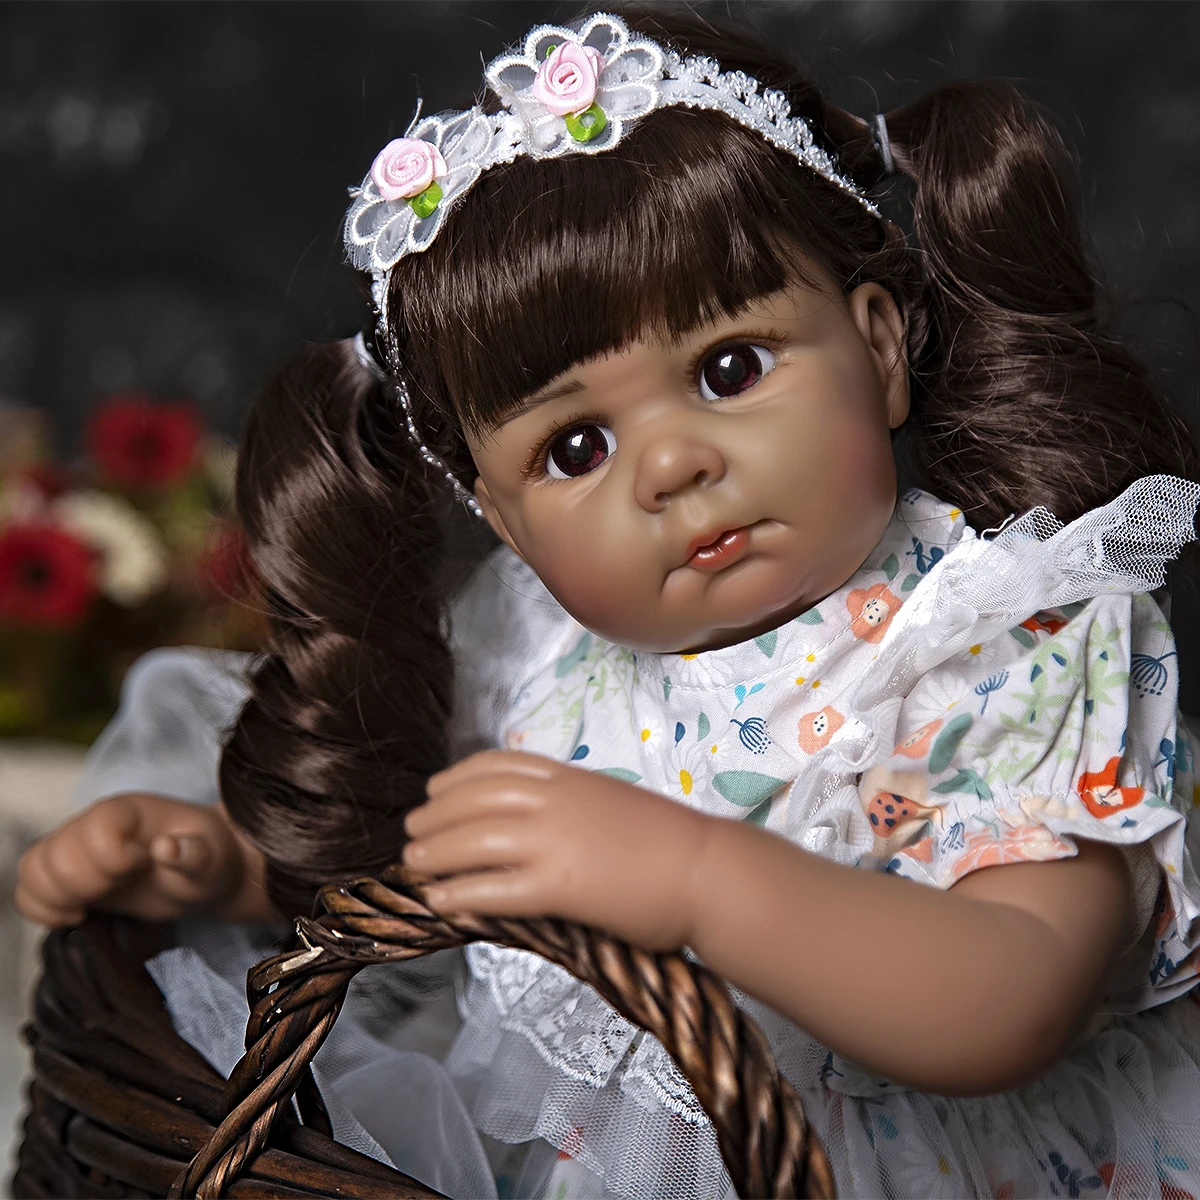 

KEIUMI DIY Reborn Kit 20 Inch Silicone Vinyl Blank Unpainted Bebe Doll Part Unfinished Assembly Bebe Toys